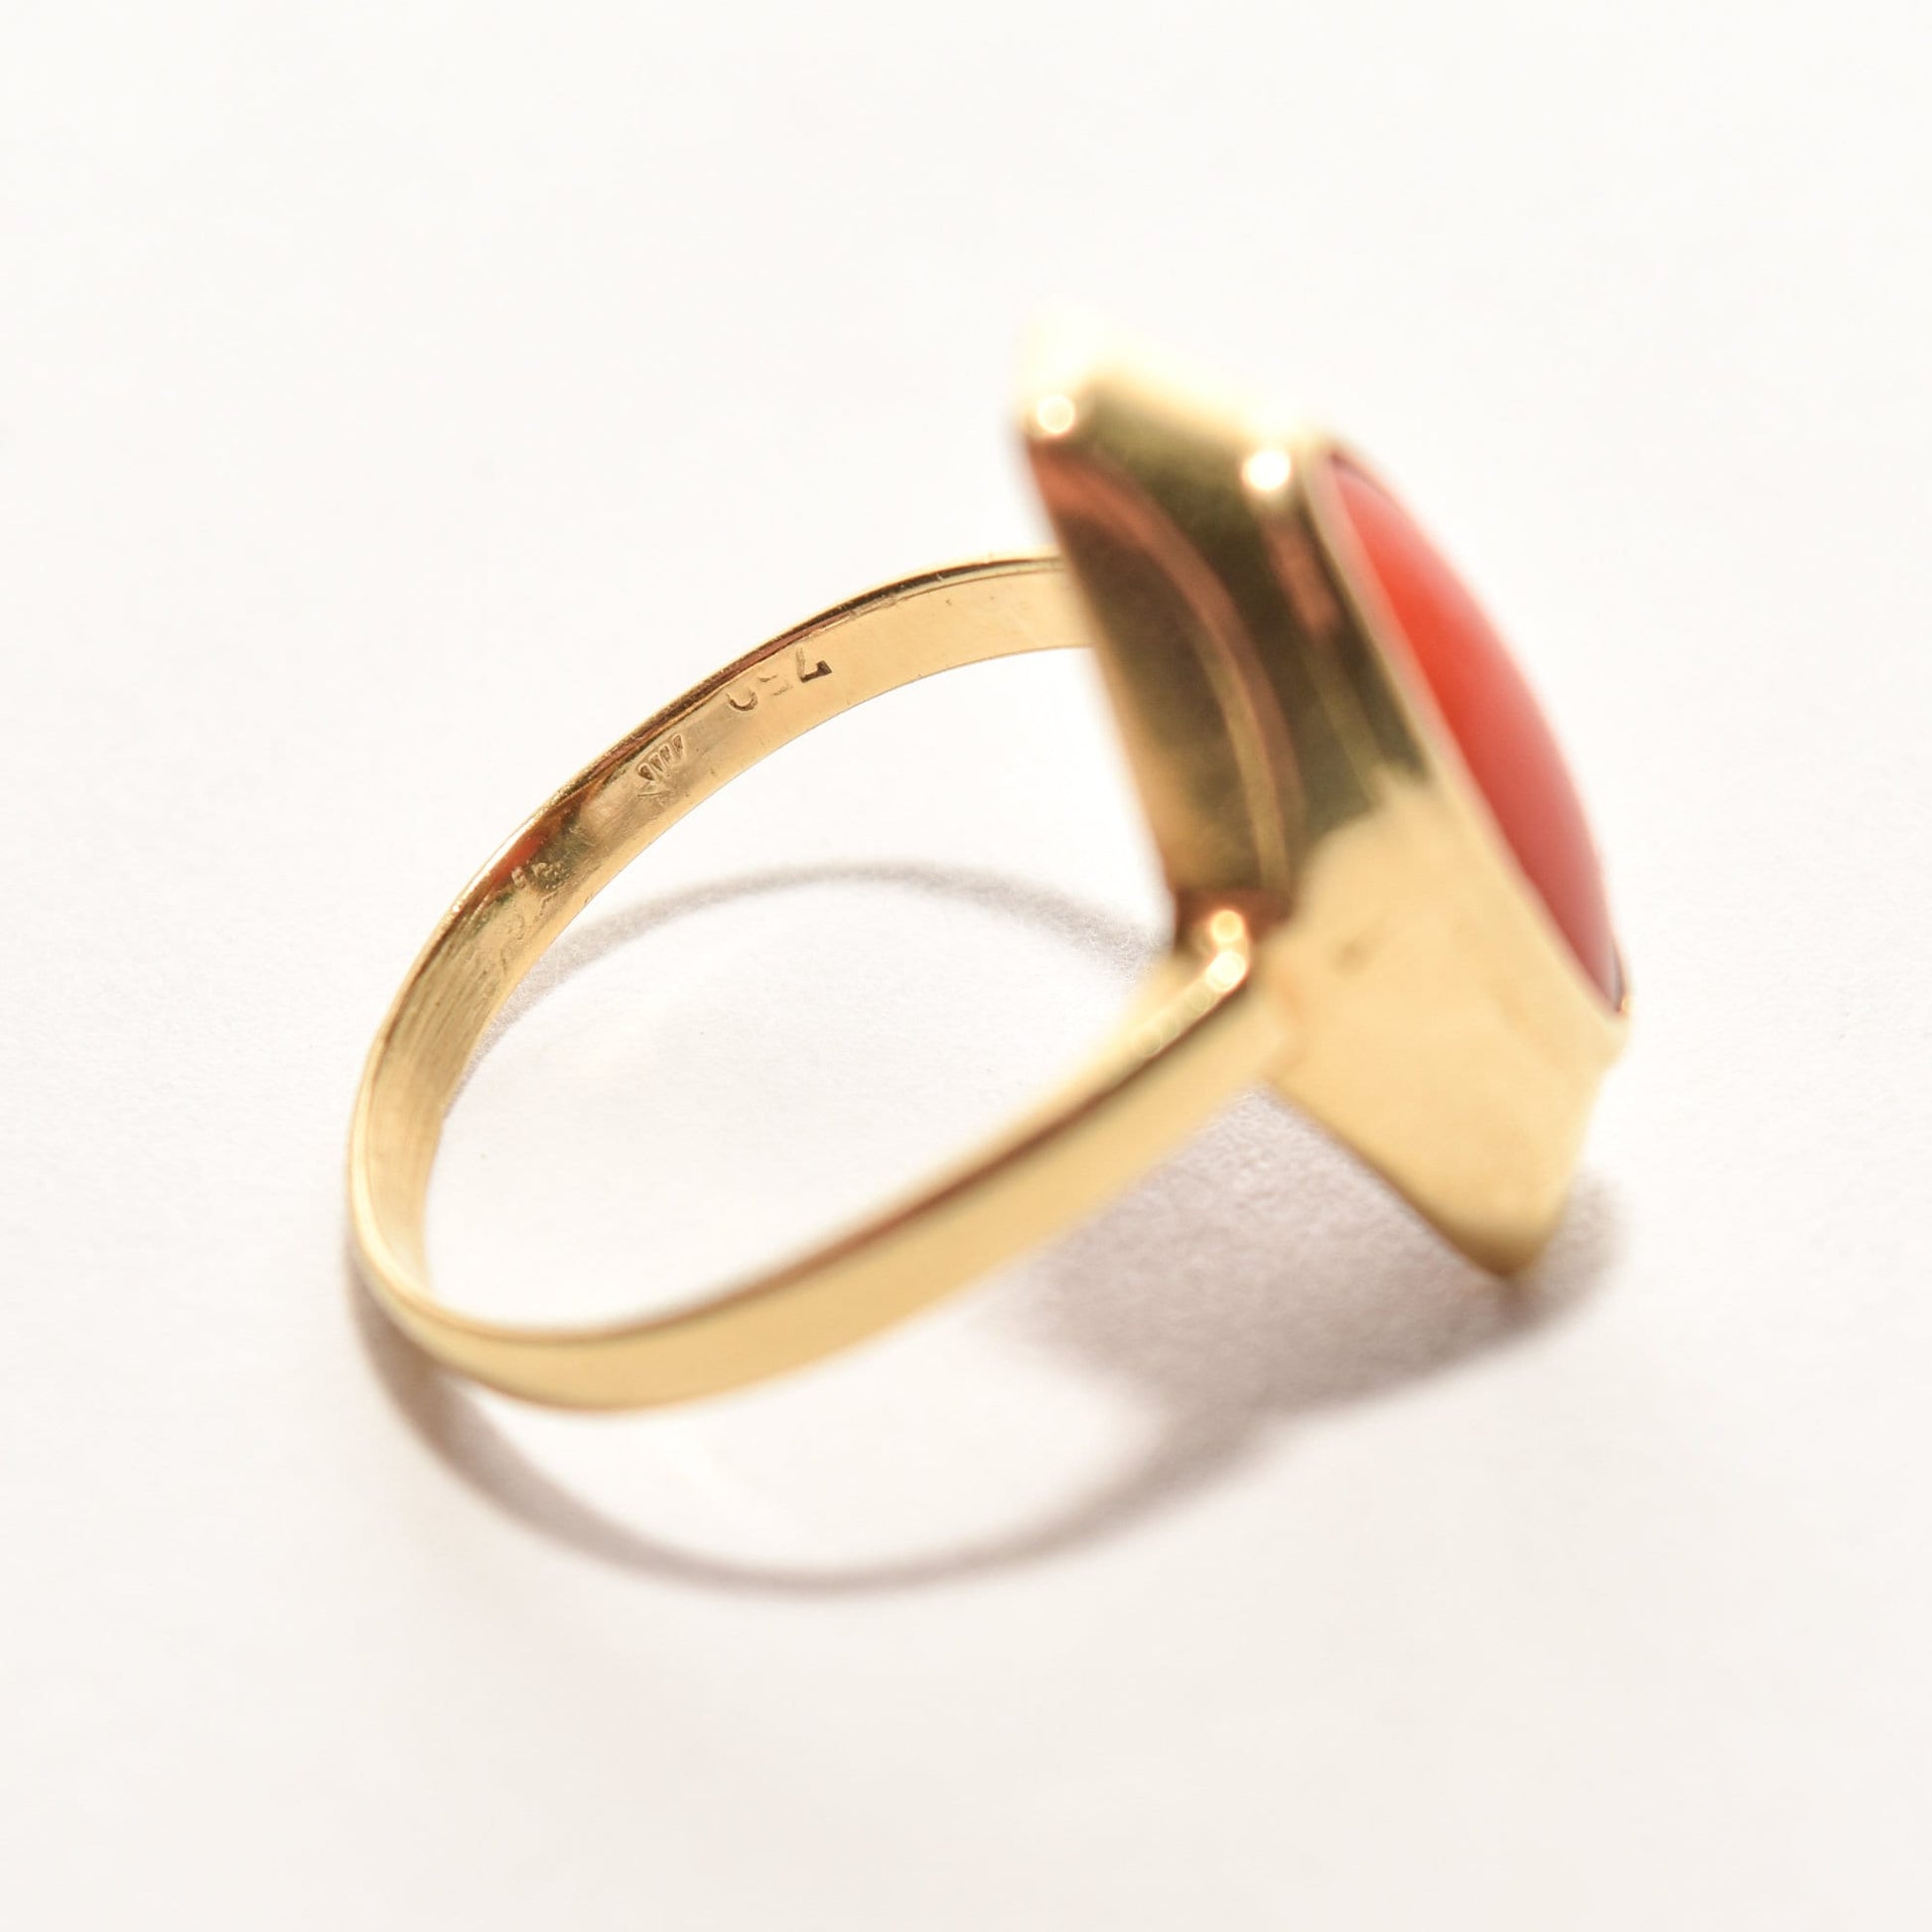 Estate 18K yellow gold ring with marquise-cut red coral, size 5.25 US, on a white background.